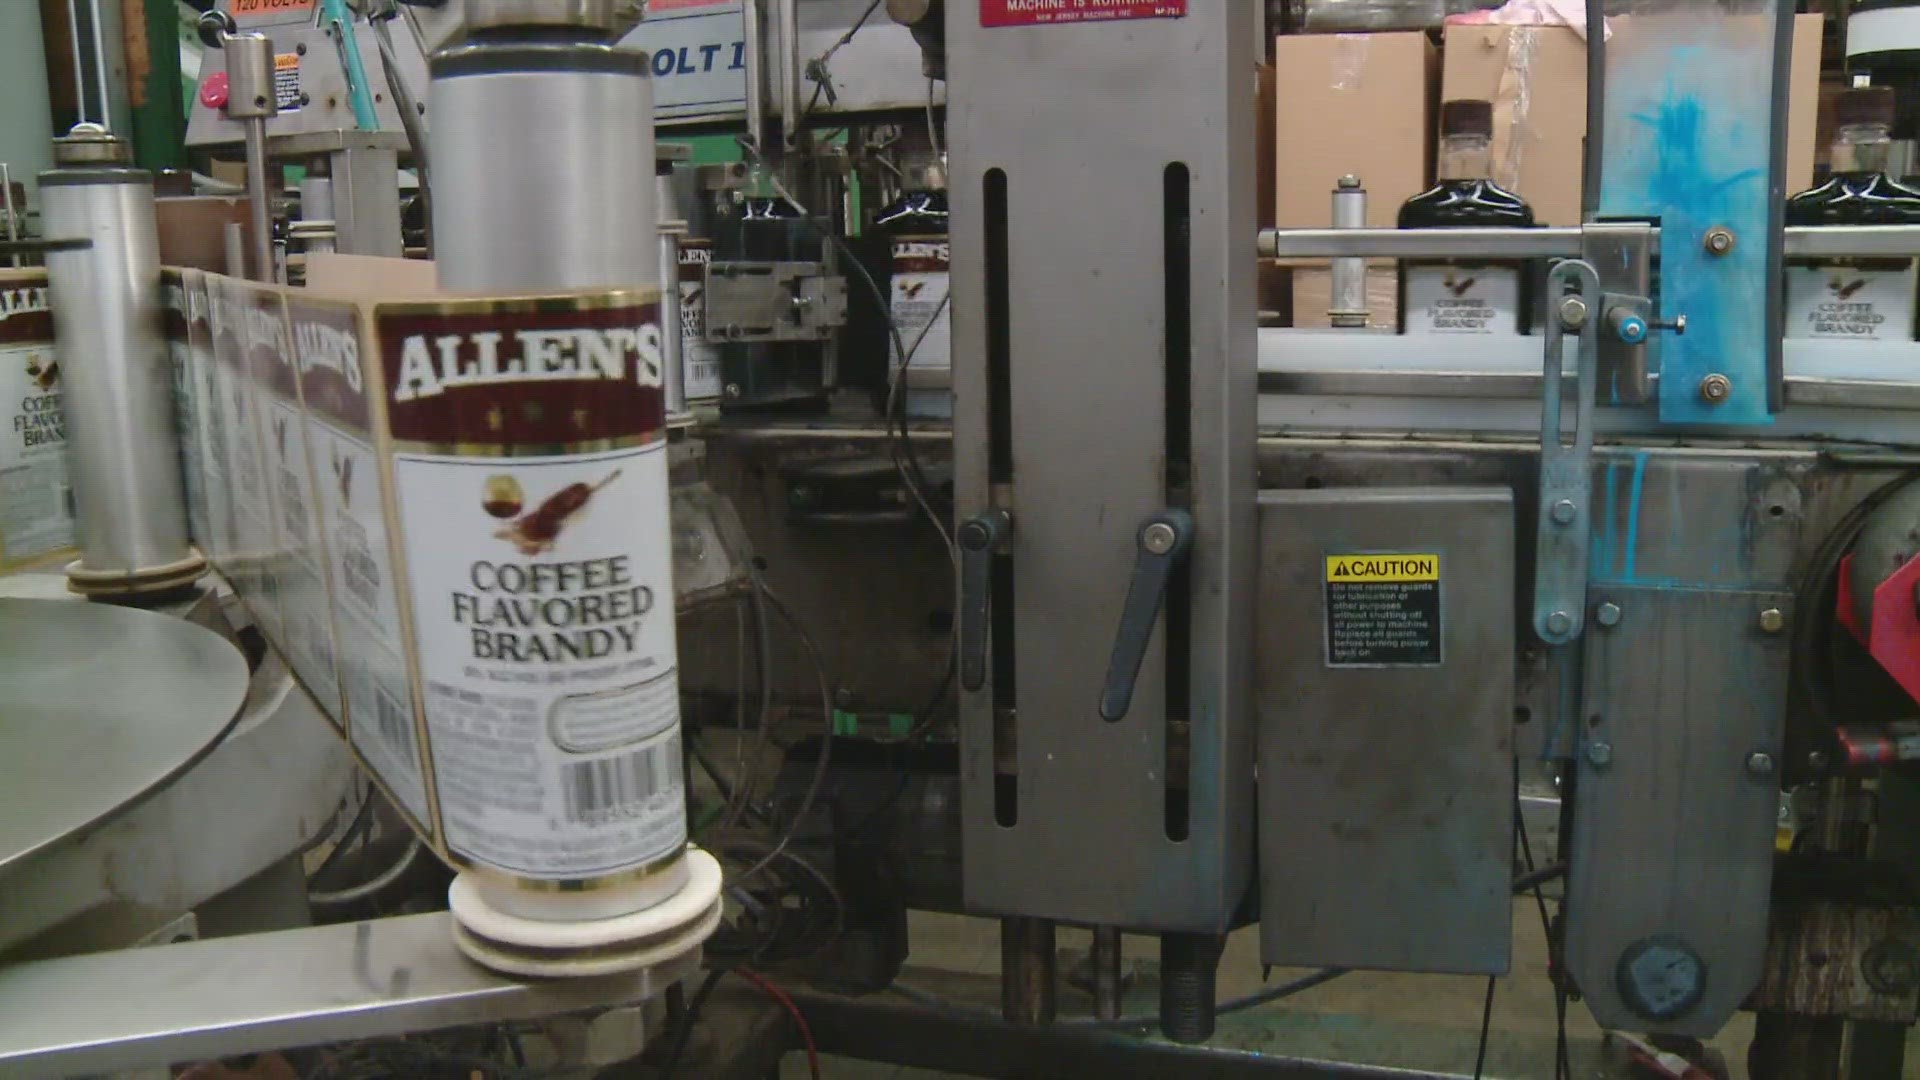 Allen's Coffee Brandy is "the Champagne of Maine." No one's sure why, but it's a pretty well embraced quirk.